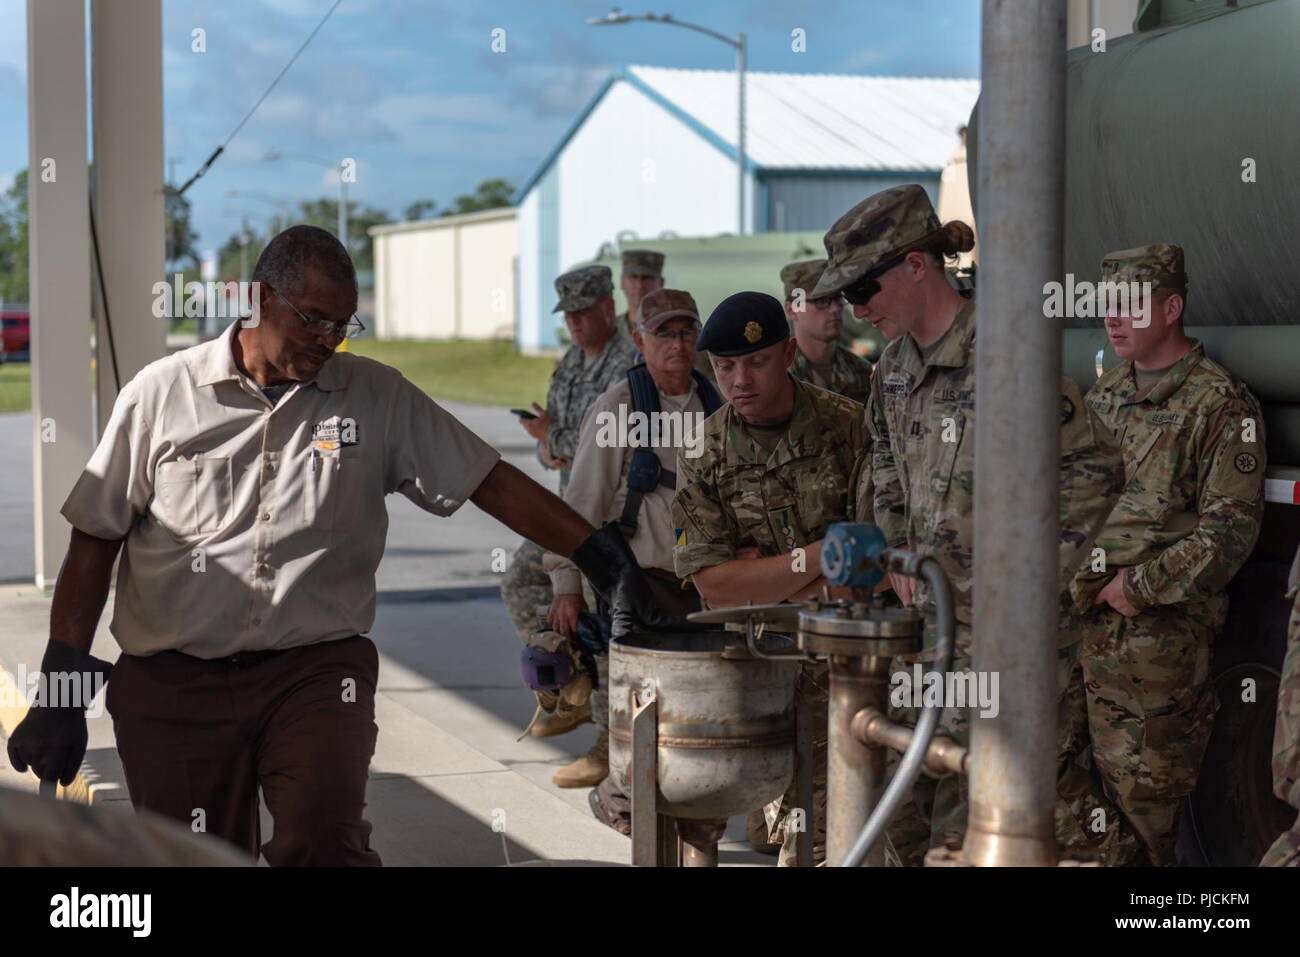 U.S. and British Soldiers observe a member of the Naval Supply Systems Command as a fuel sample is drawn for testing at Naval Air Station Jacksonville following the delivery from the Defense Fuel Support Point in North Jacksonville during the Quartermaster Liquid Logistics Exercise on July 18, 2018. The QLLEX is a multi-component, joint exercise involving elements from the Army Reserves, Defense Logistics Agency and the United States Navy to transport petroleum from a supply hub to the end user, in this case Navy Aviation. ( Stock Photo